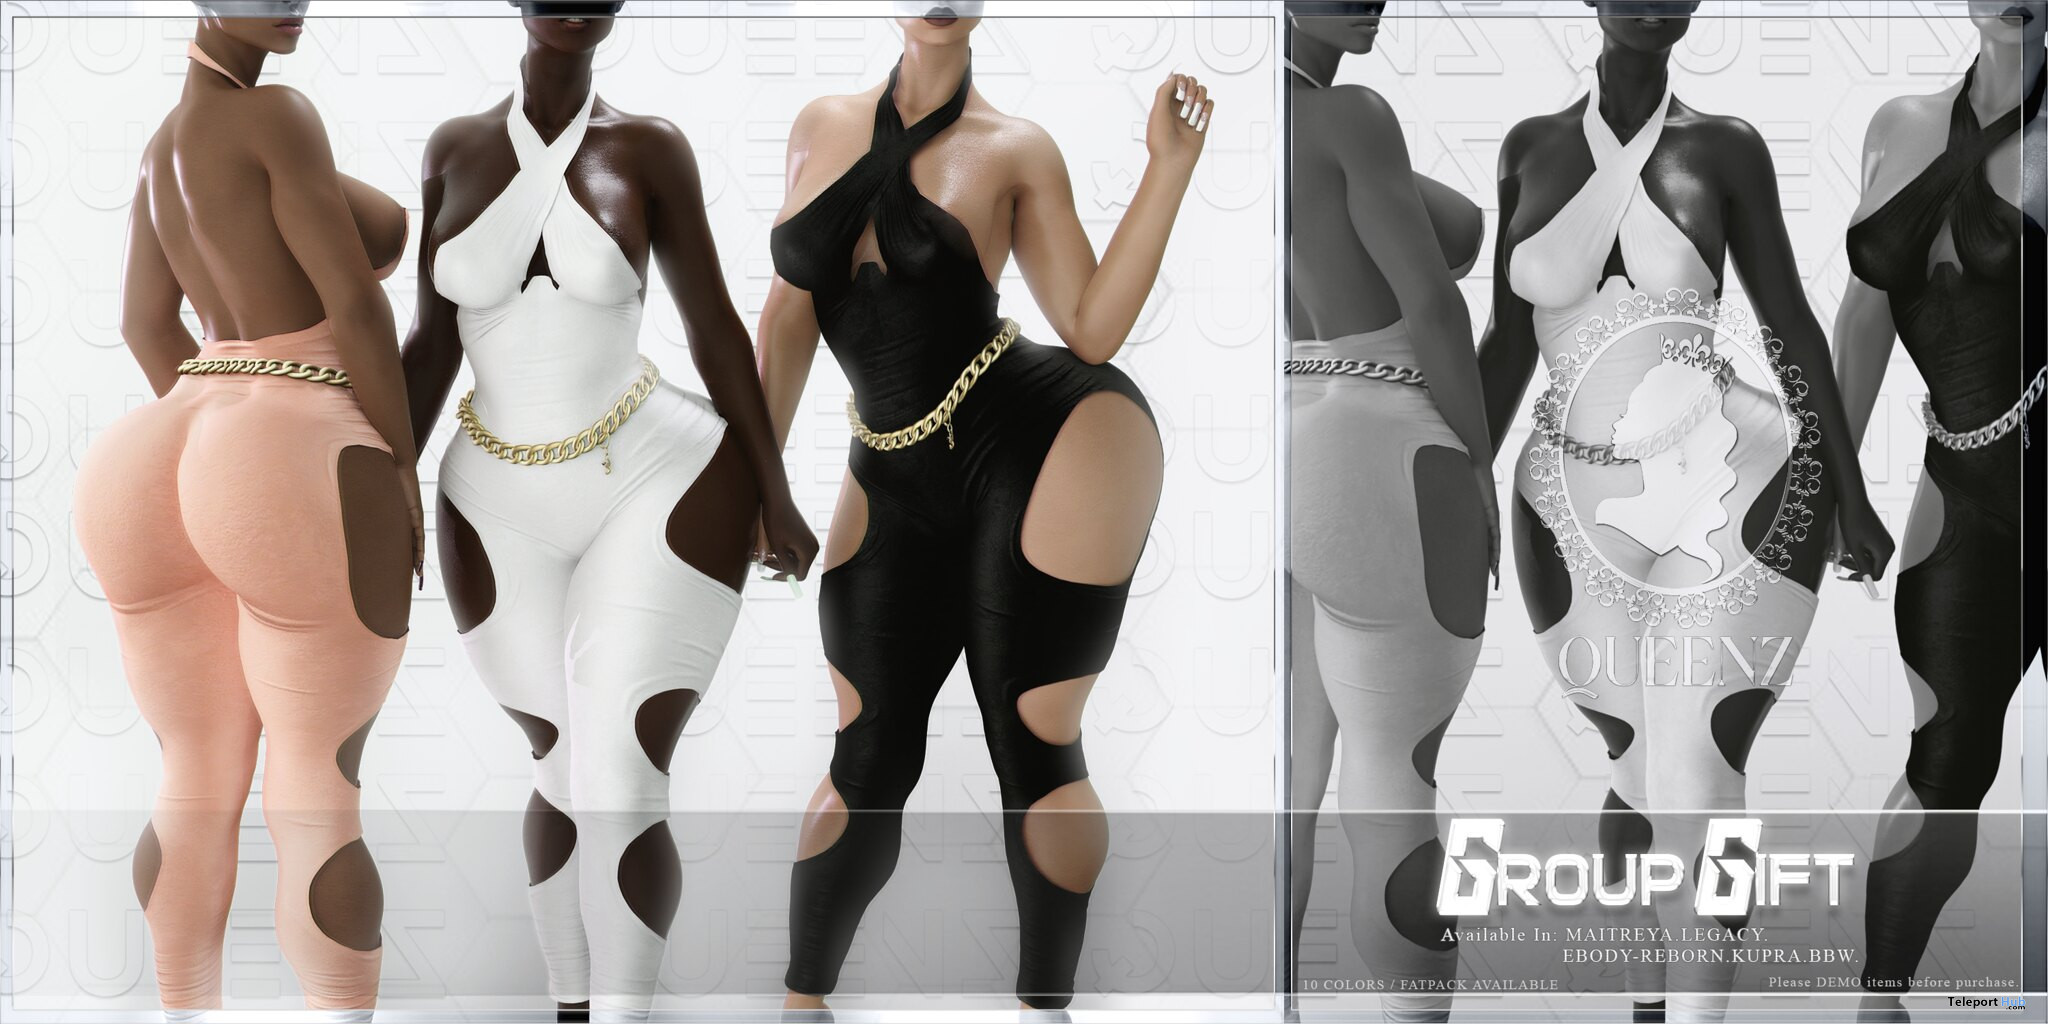 Bodysuit & Waist Chain February 2022 Group Gift by QUEENZ - Teleport Hub - teleporthub.com